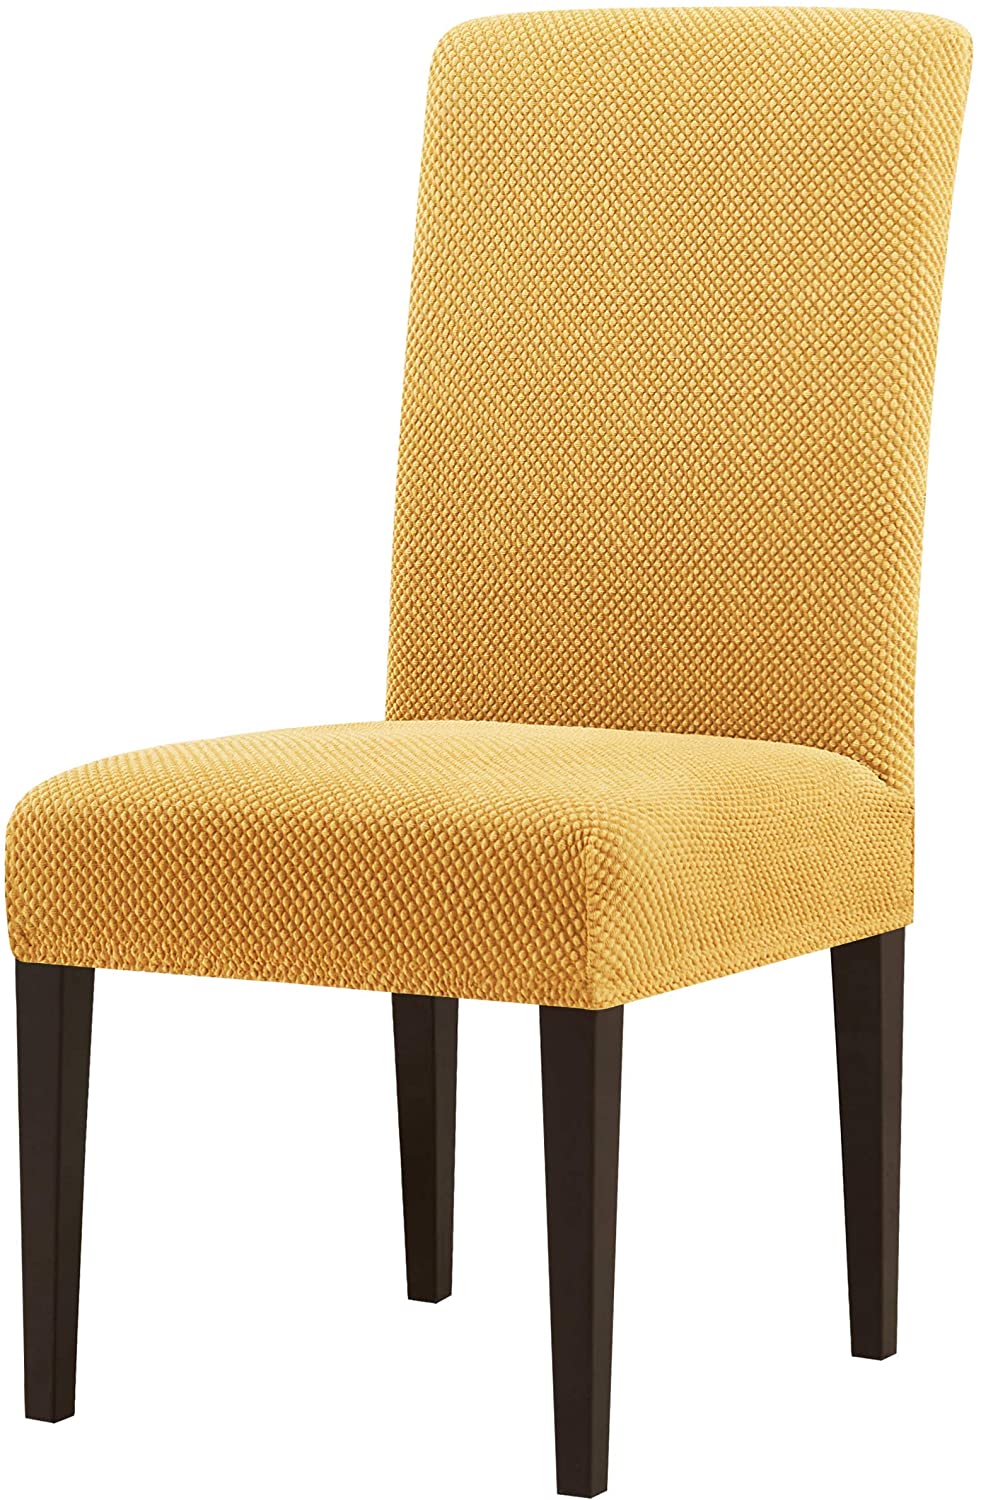 Review of subrtex Dining Room Chair Slipcovers Jacquard Parsons Chair Covers